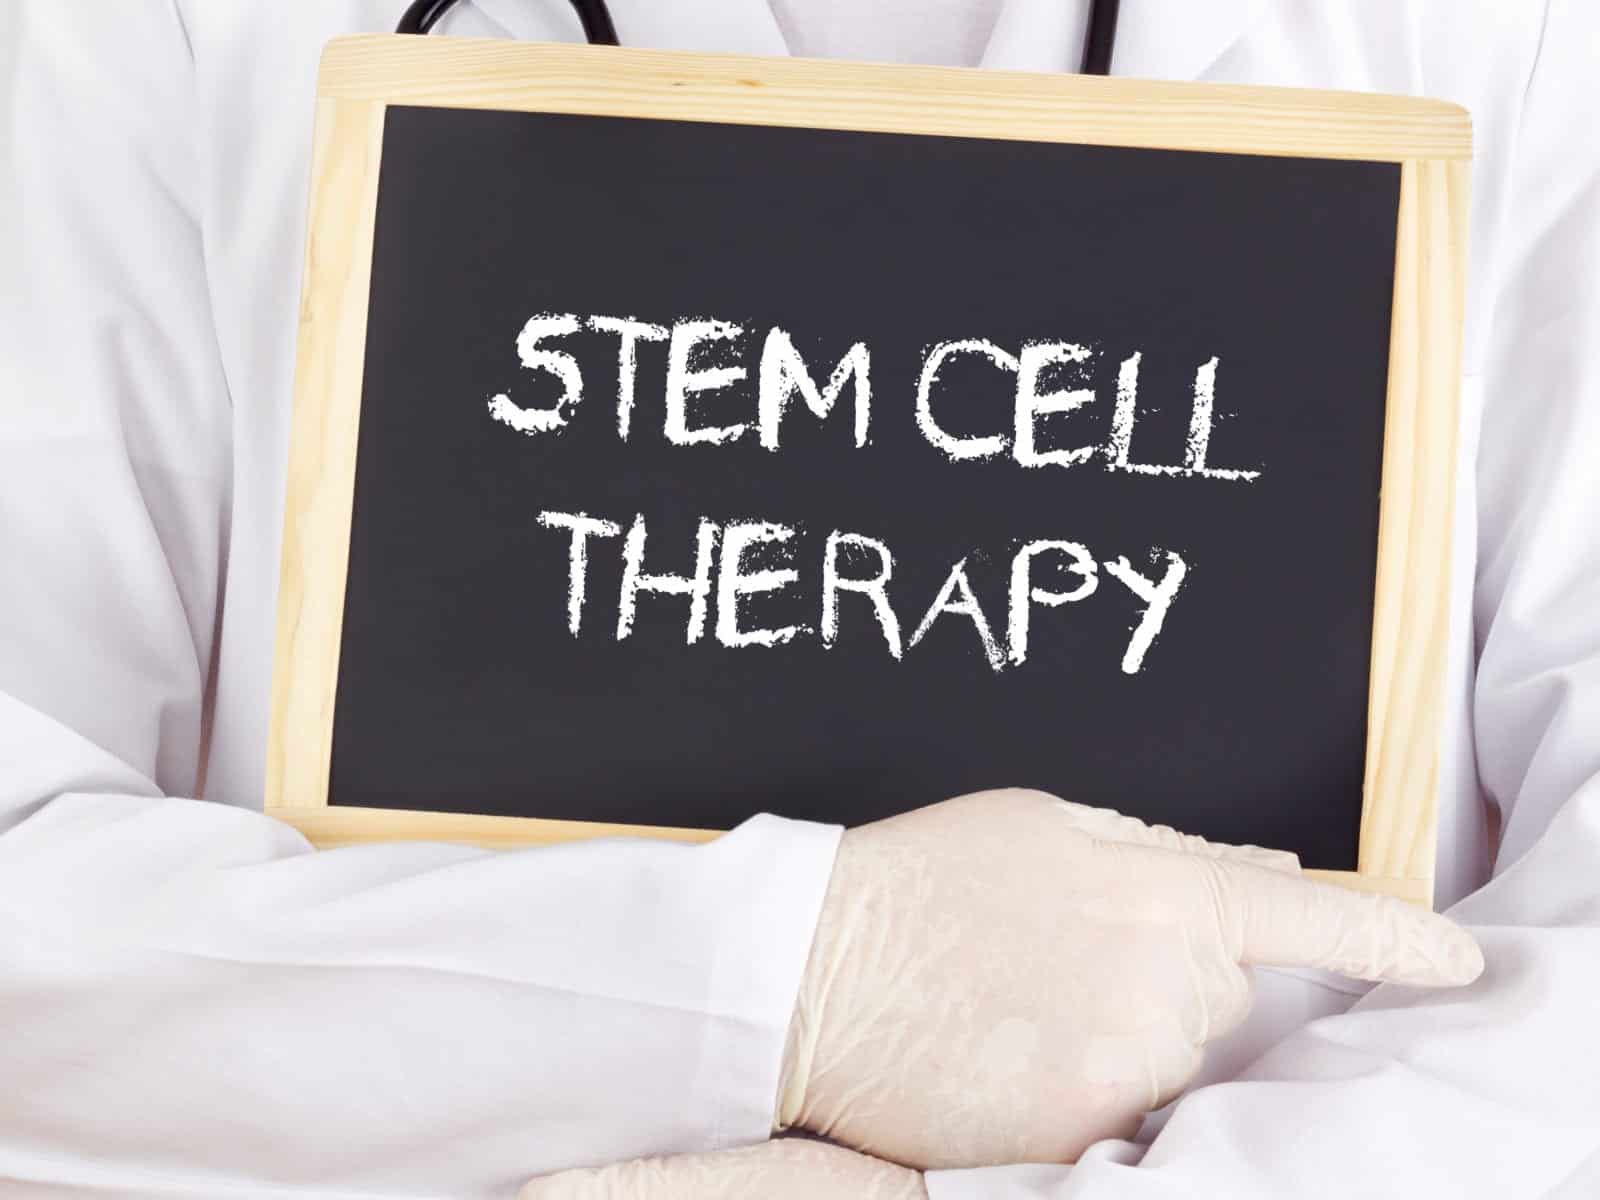 Does Medicare Cover Stem Cell Therapy